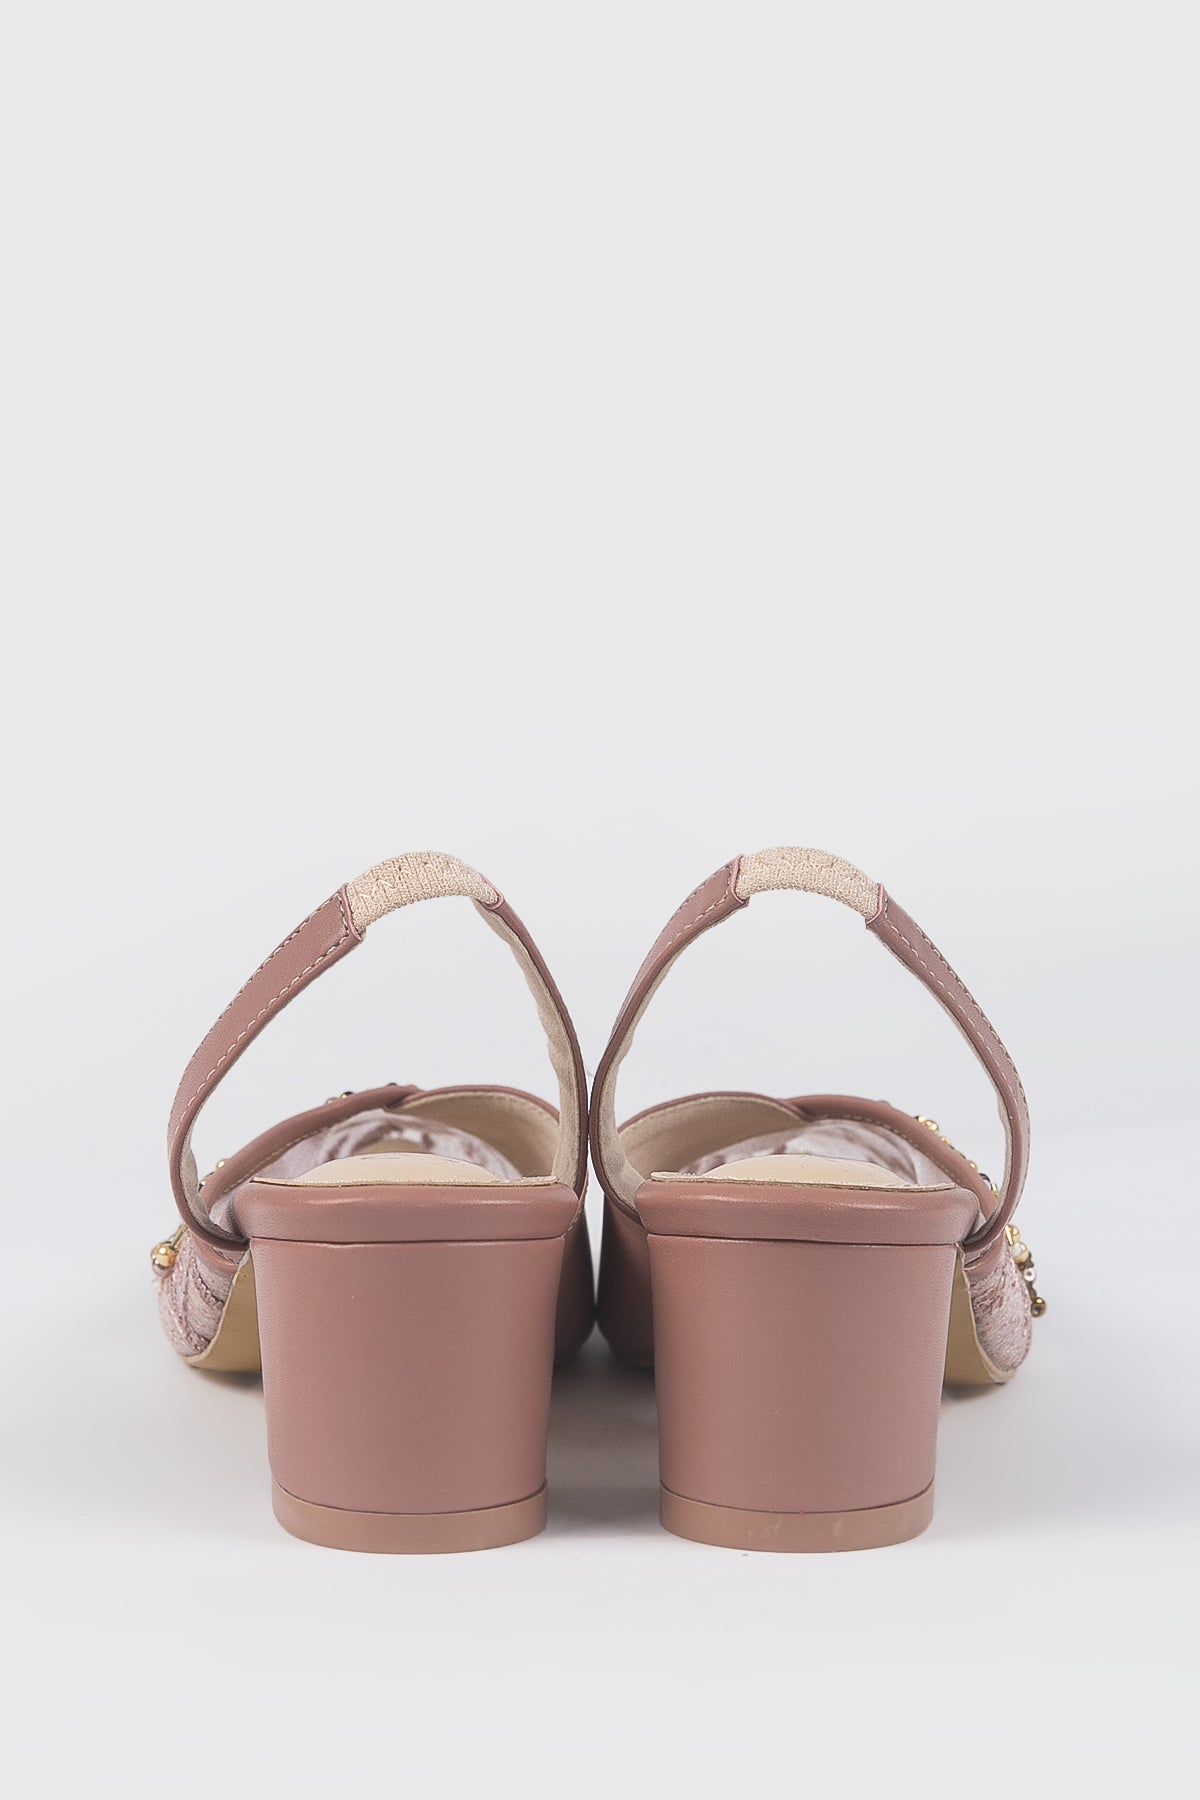 Moments Shoes in Baby Pink